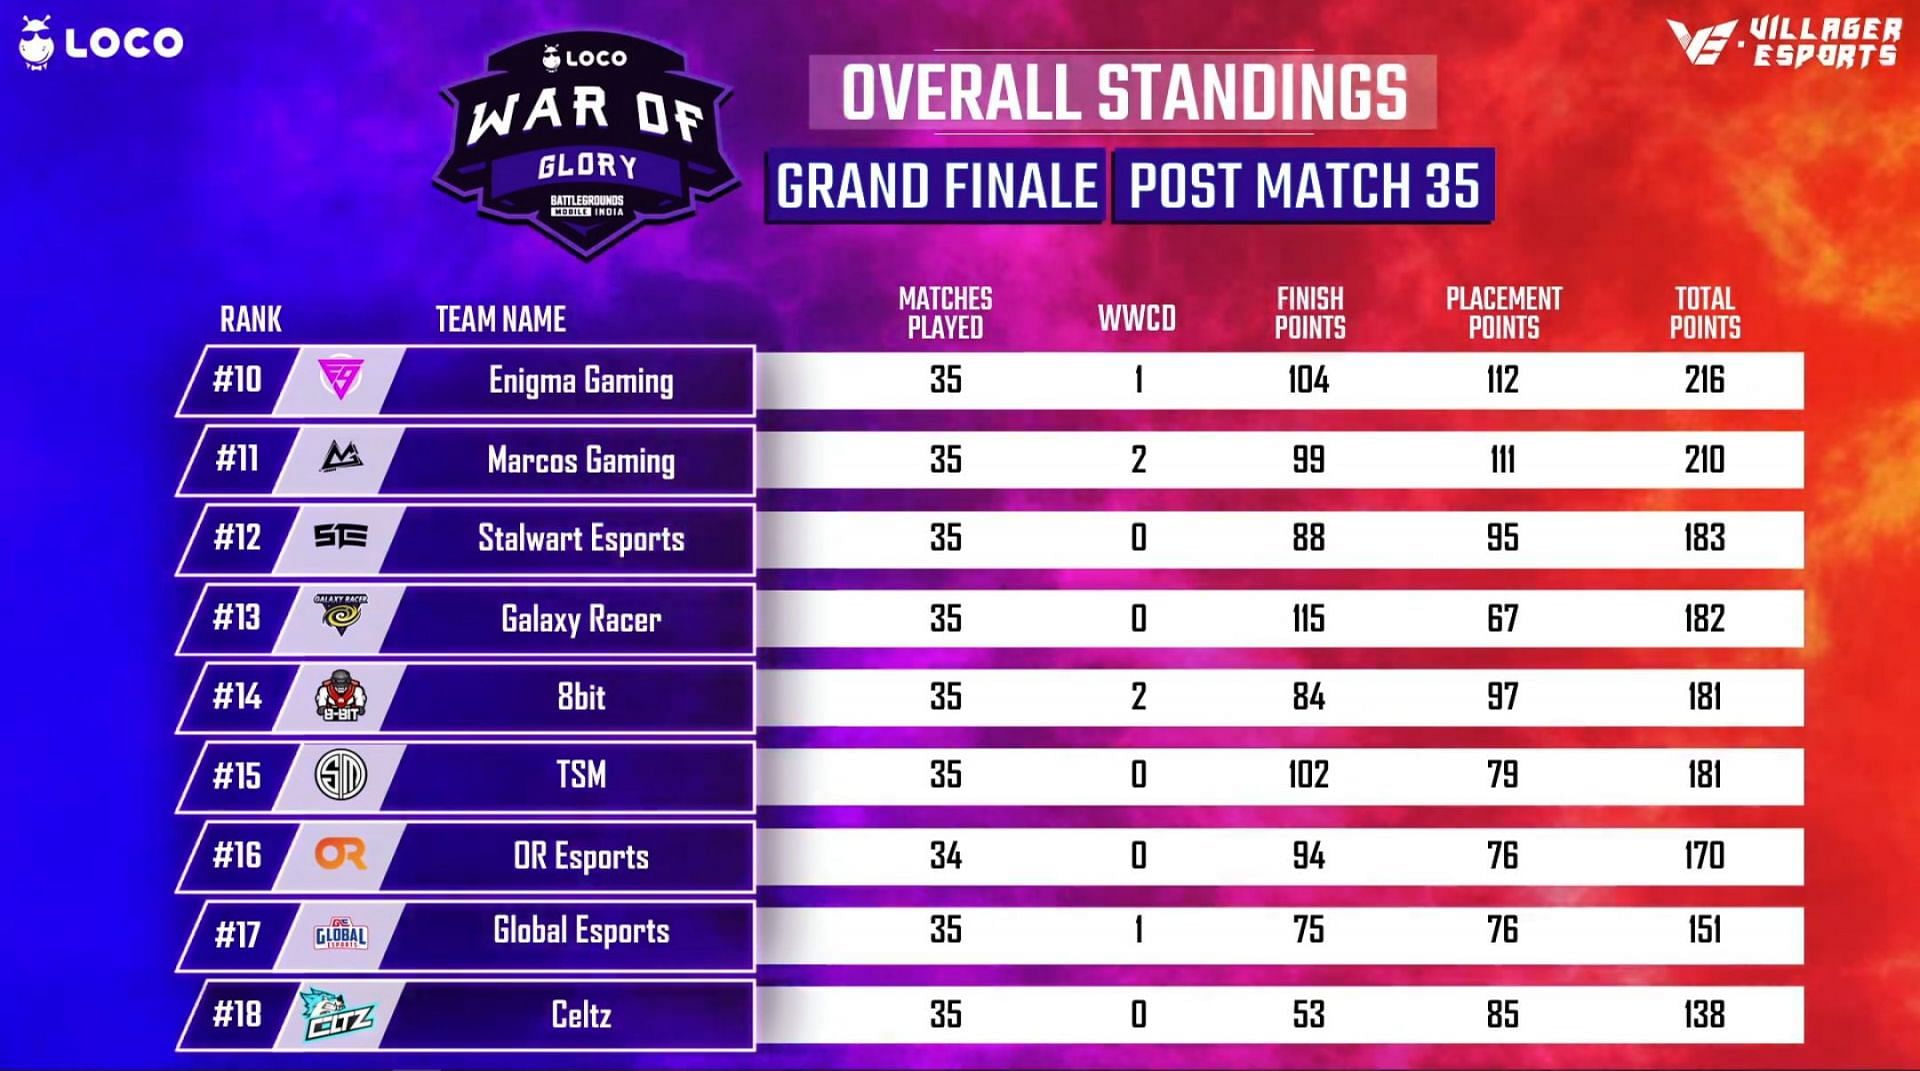 TSM finished in 15th place of the BGMI War of Glory finals